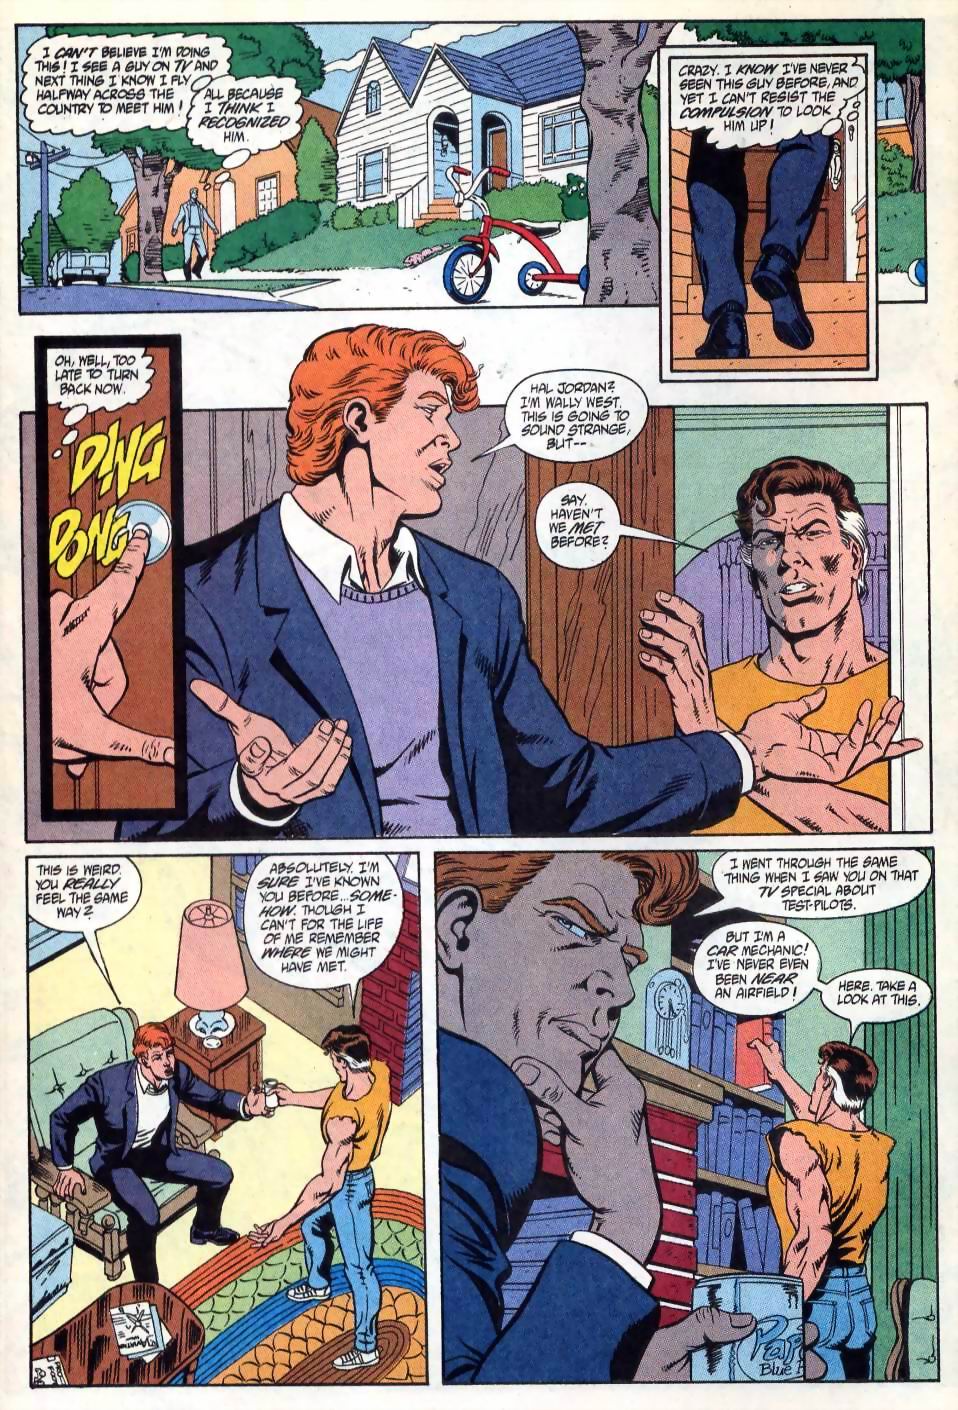 Justice League International (1993) 59 Page 5